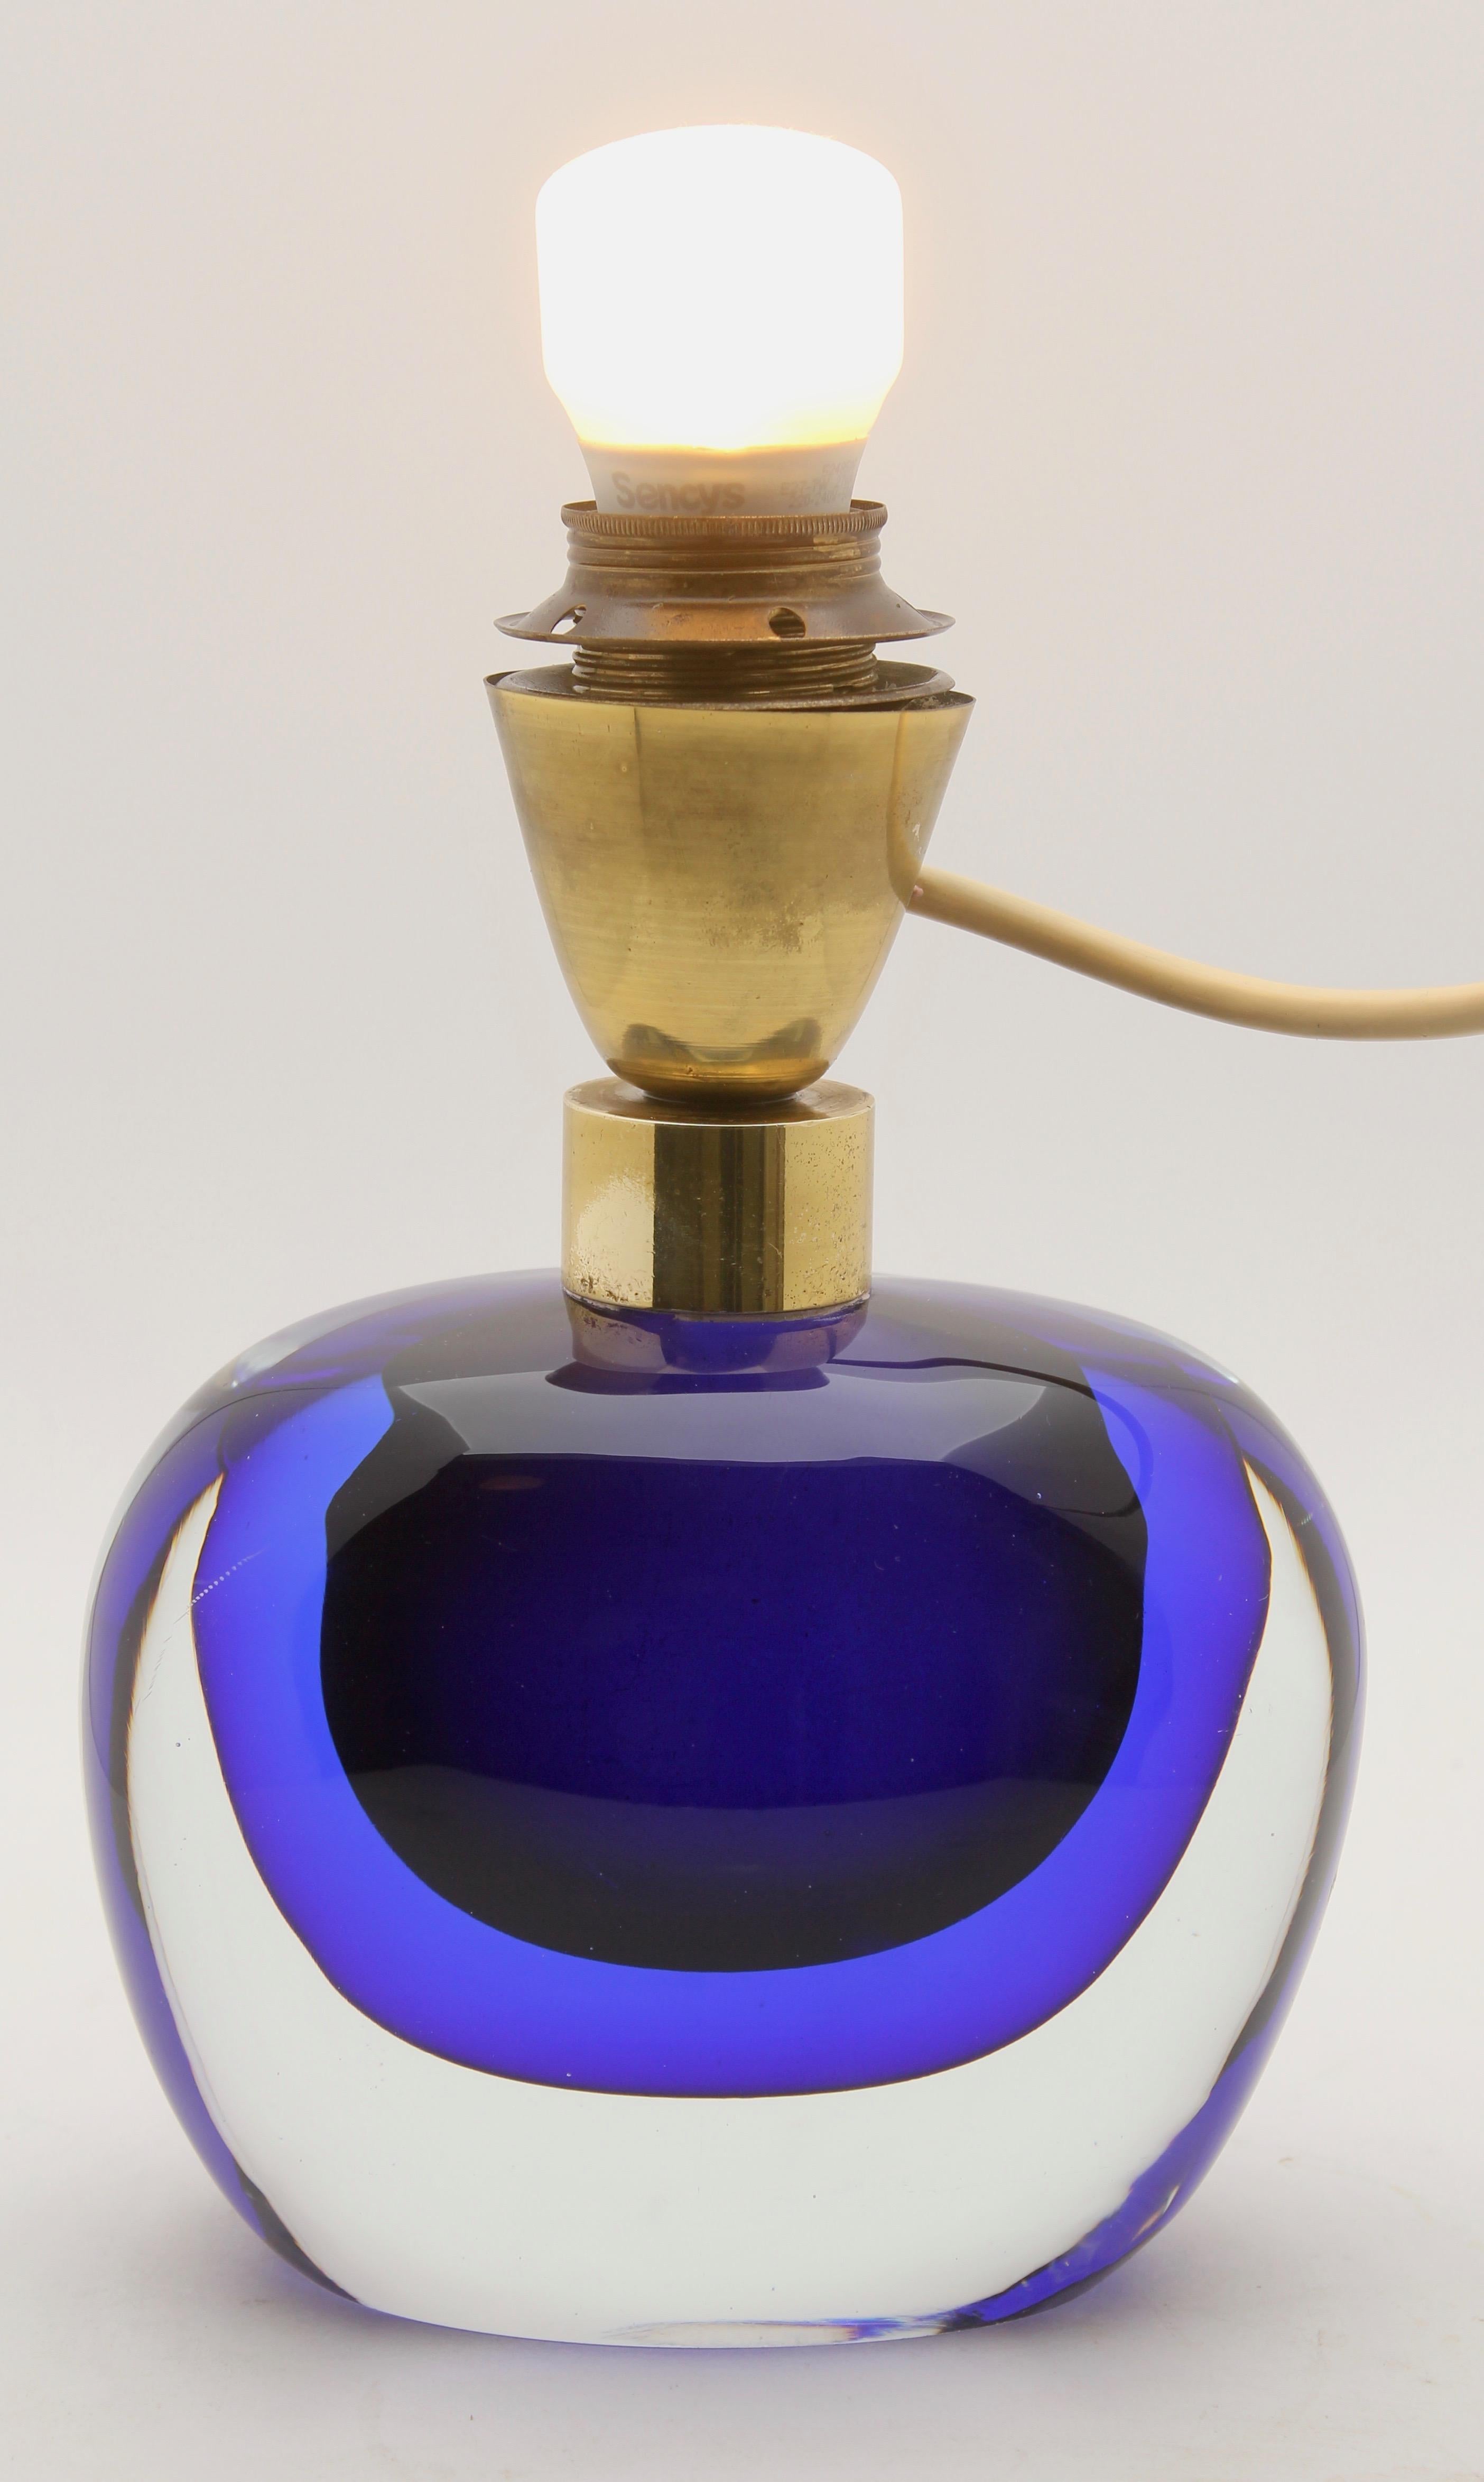 Mid-20th Century Murano Globe-Shaped Lamp Cobalt Blue with a Dramatic Jewel-Like Effect